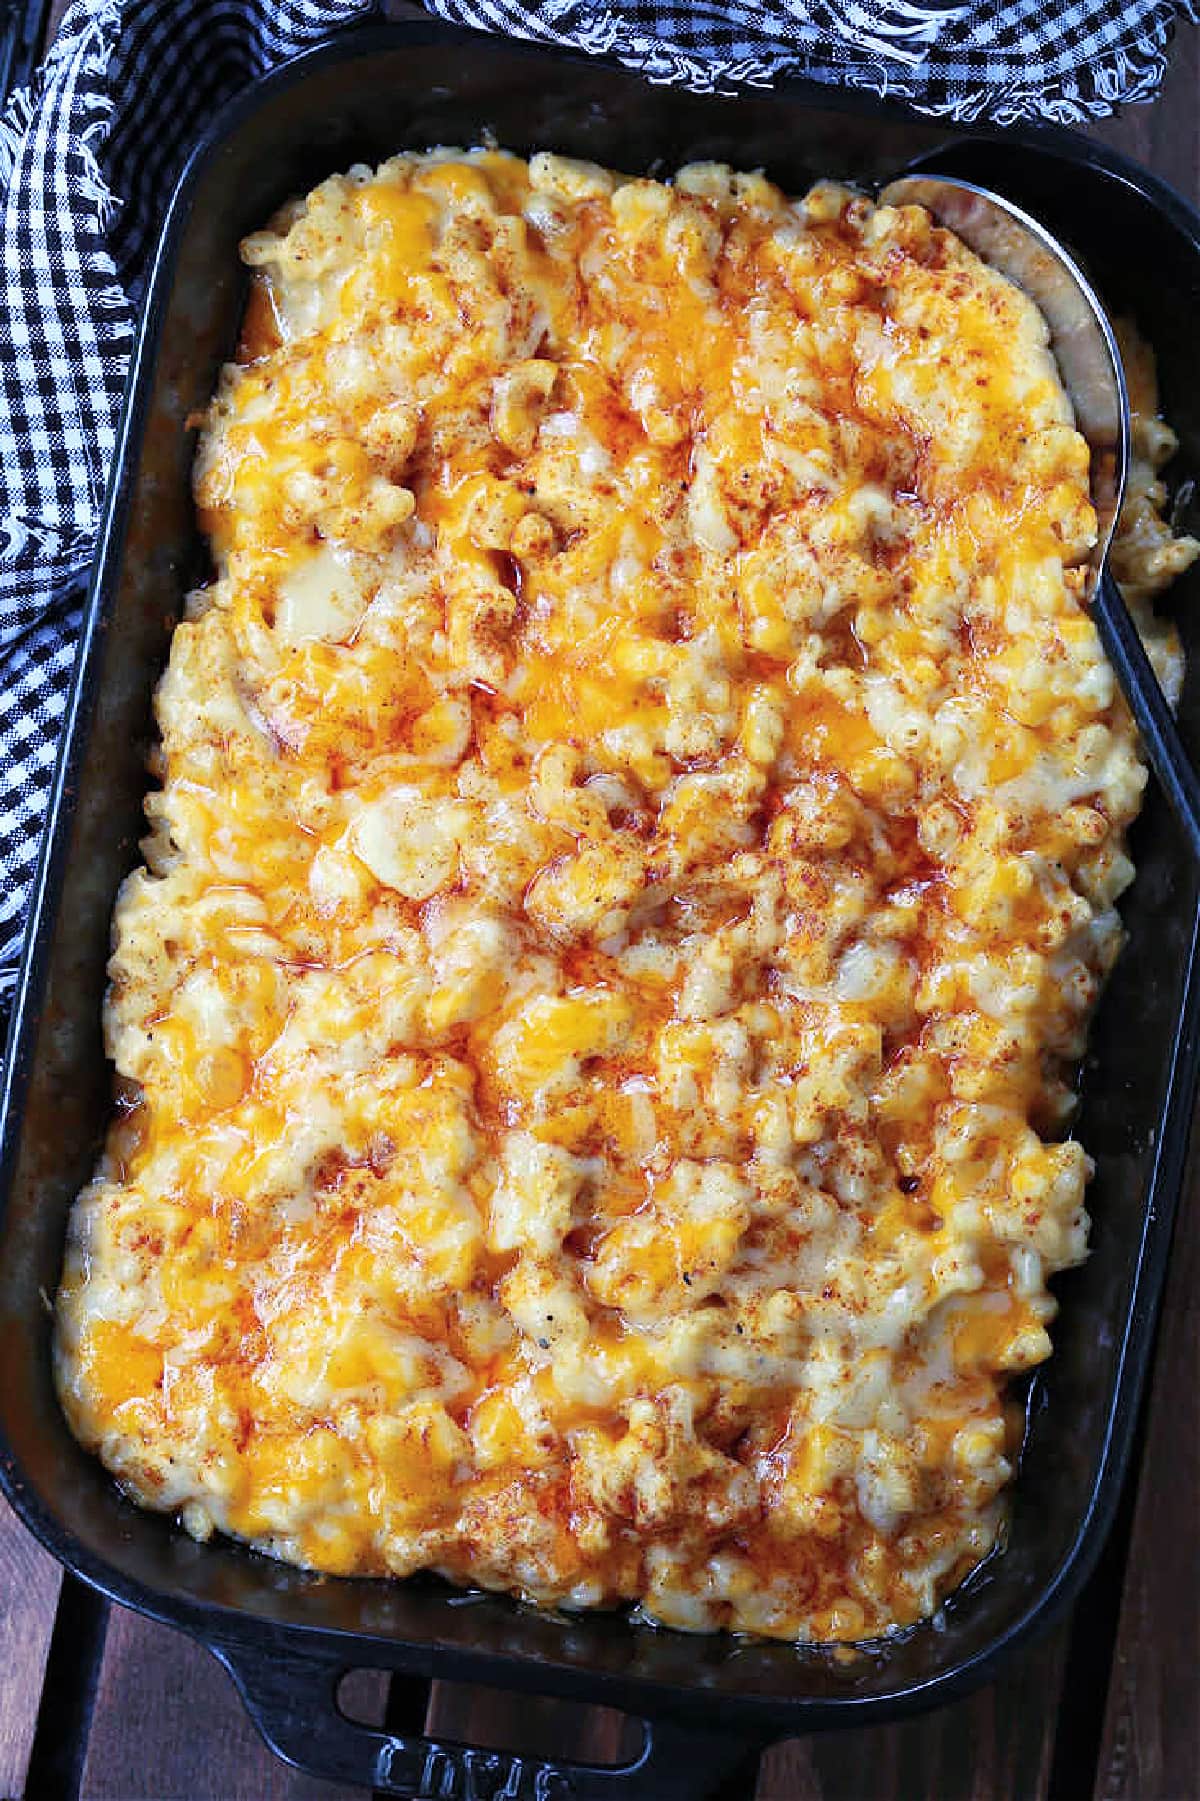 baked macaroni and cheese casserole in black dish